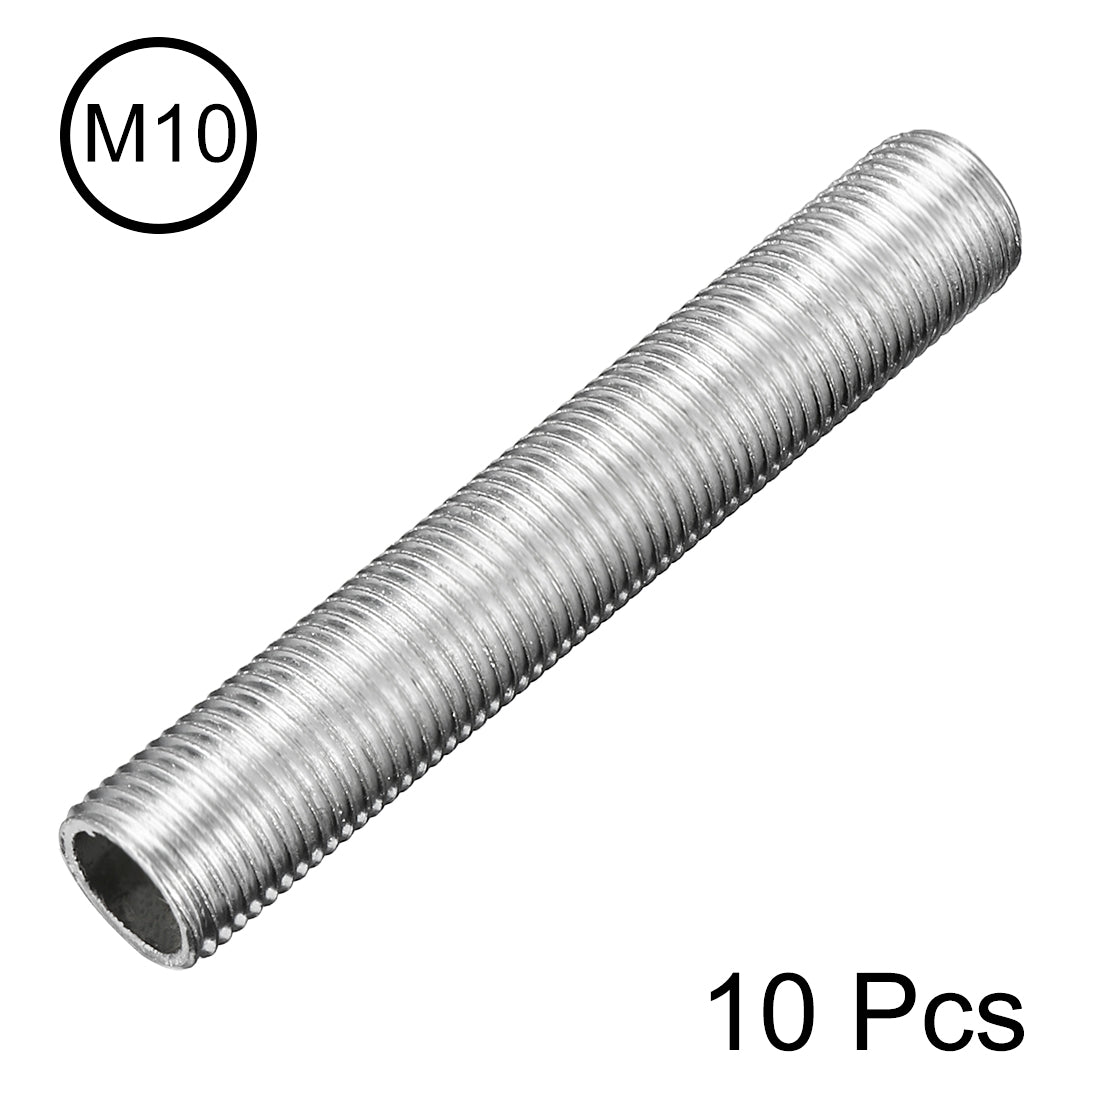 uxcell Uxcell Zinc Plated Lamp Pipe Nipple M10 60mm Length 1mm Pitch All Threaded 10Pcs